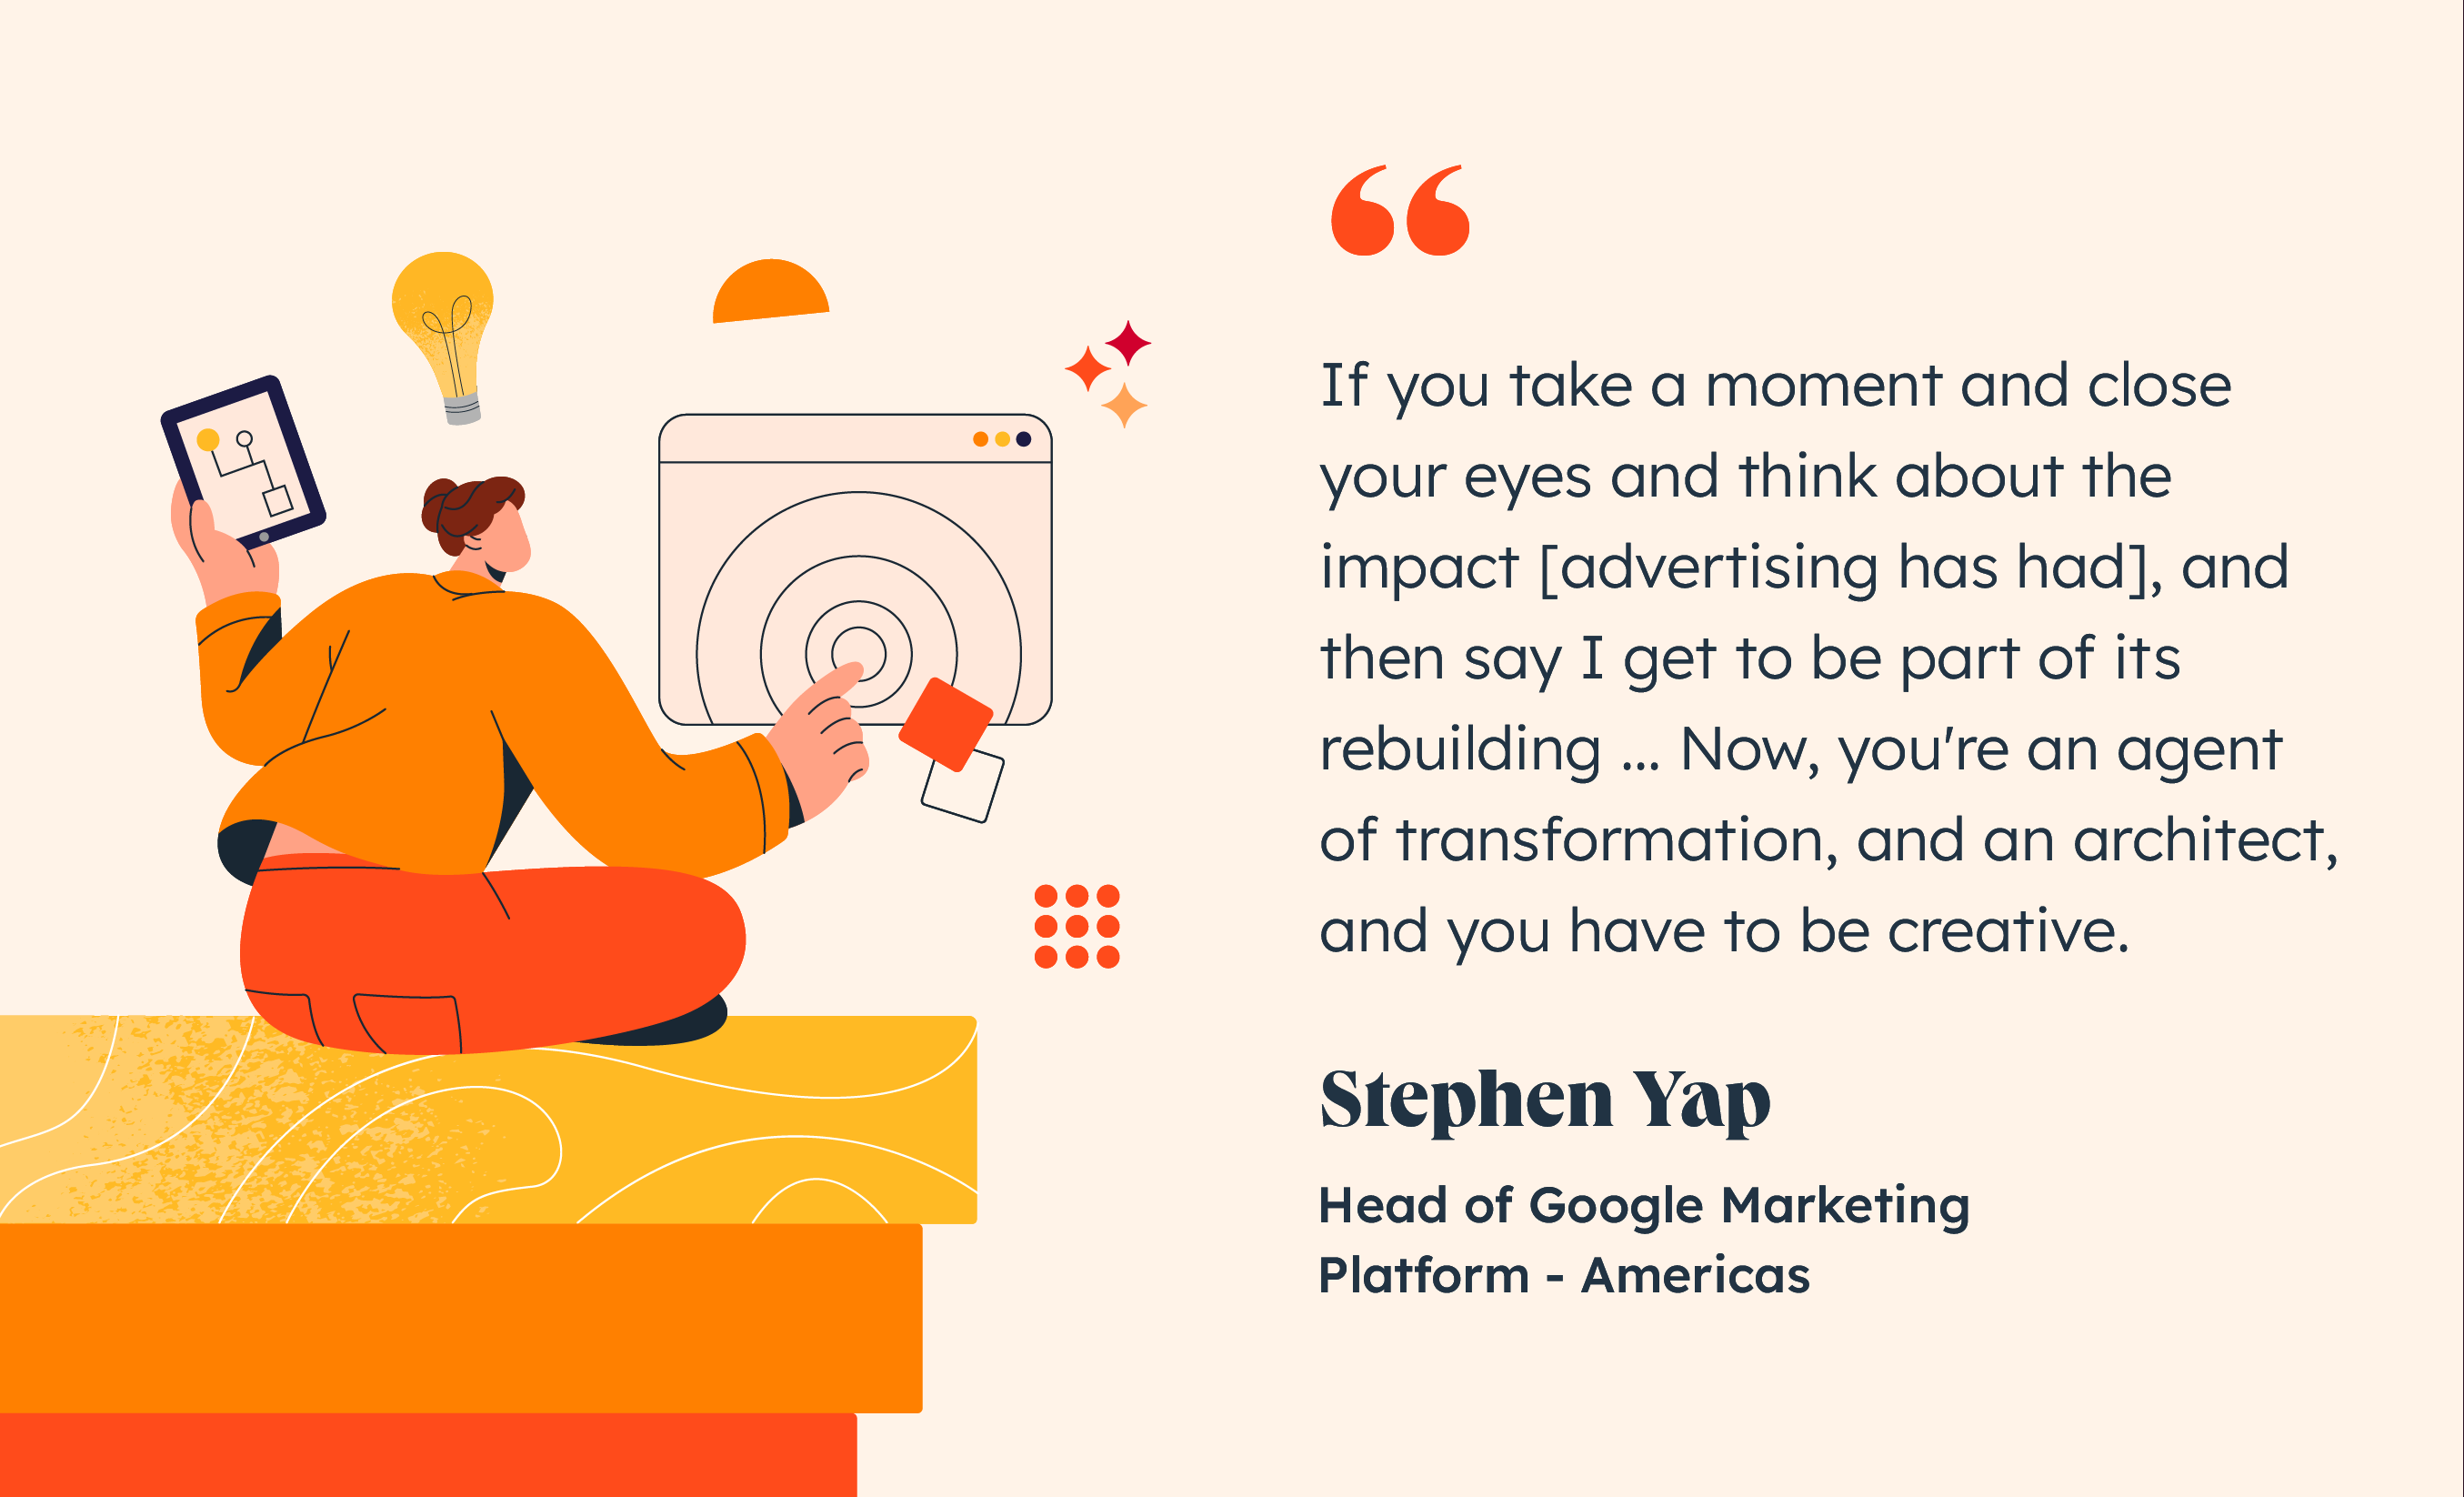 Stephen Yap about the future of advertising